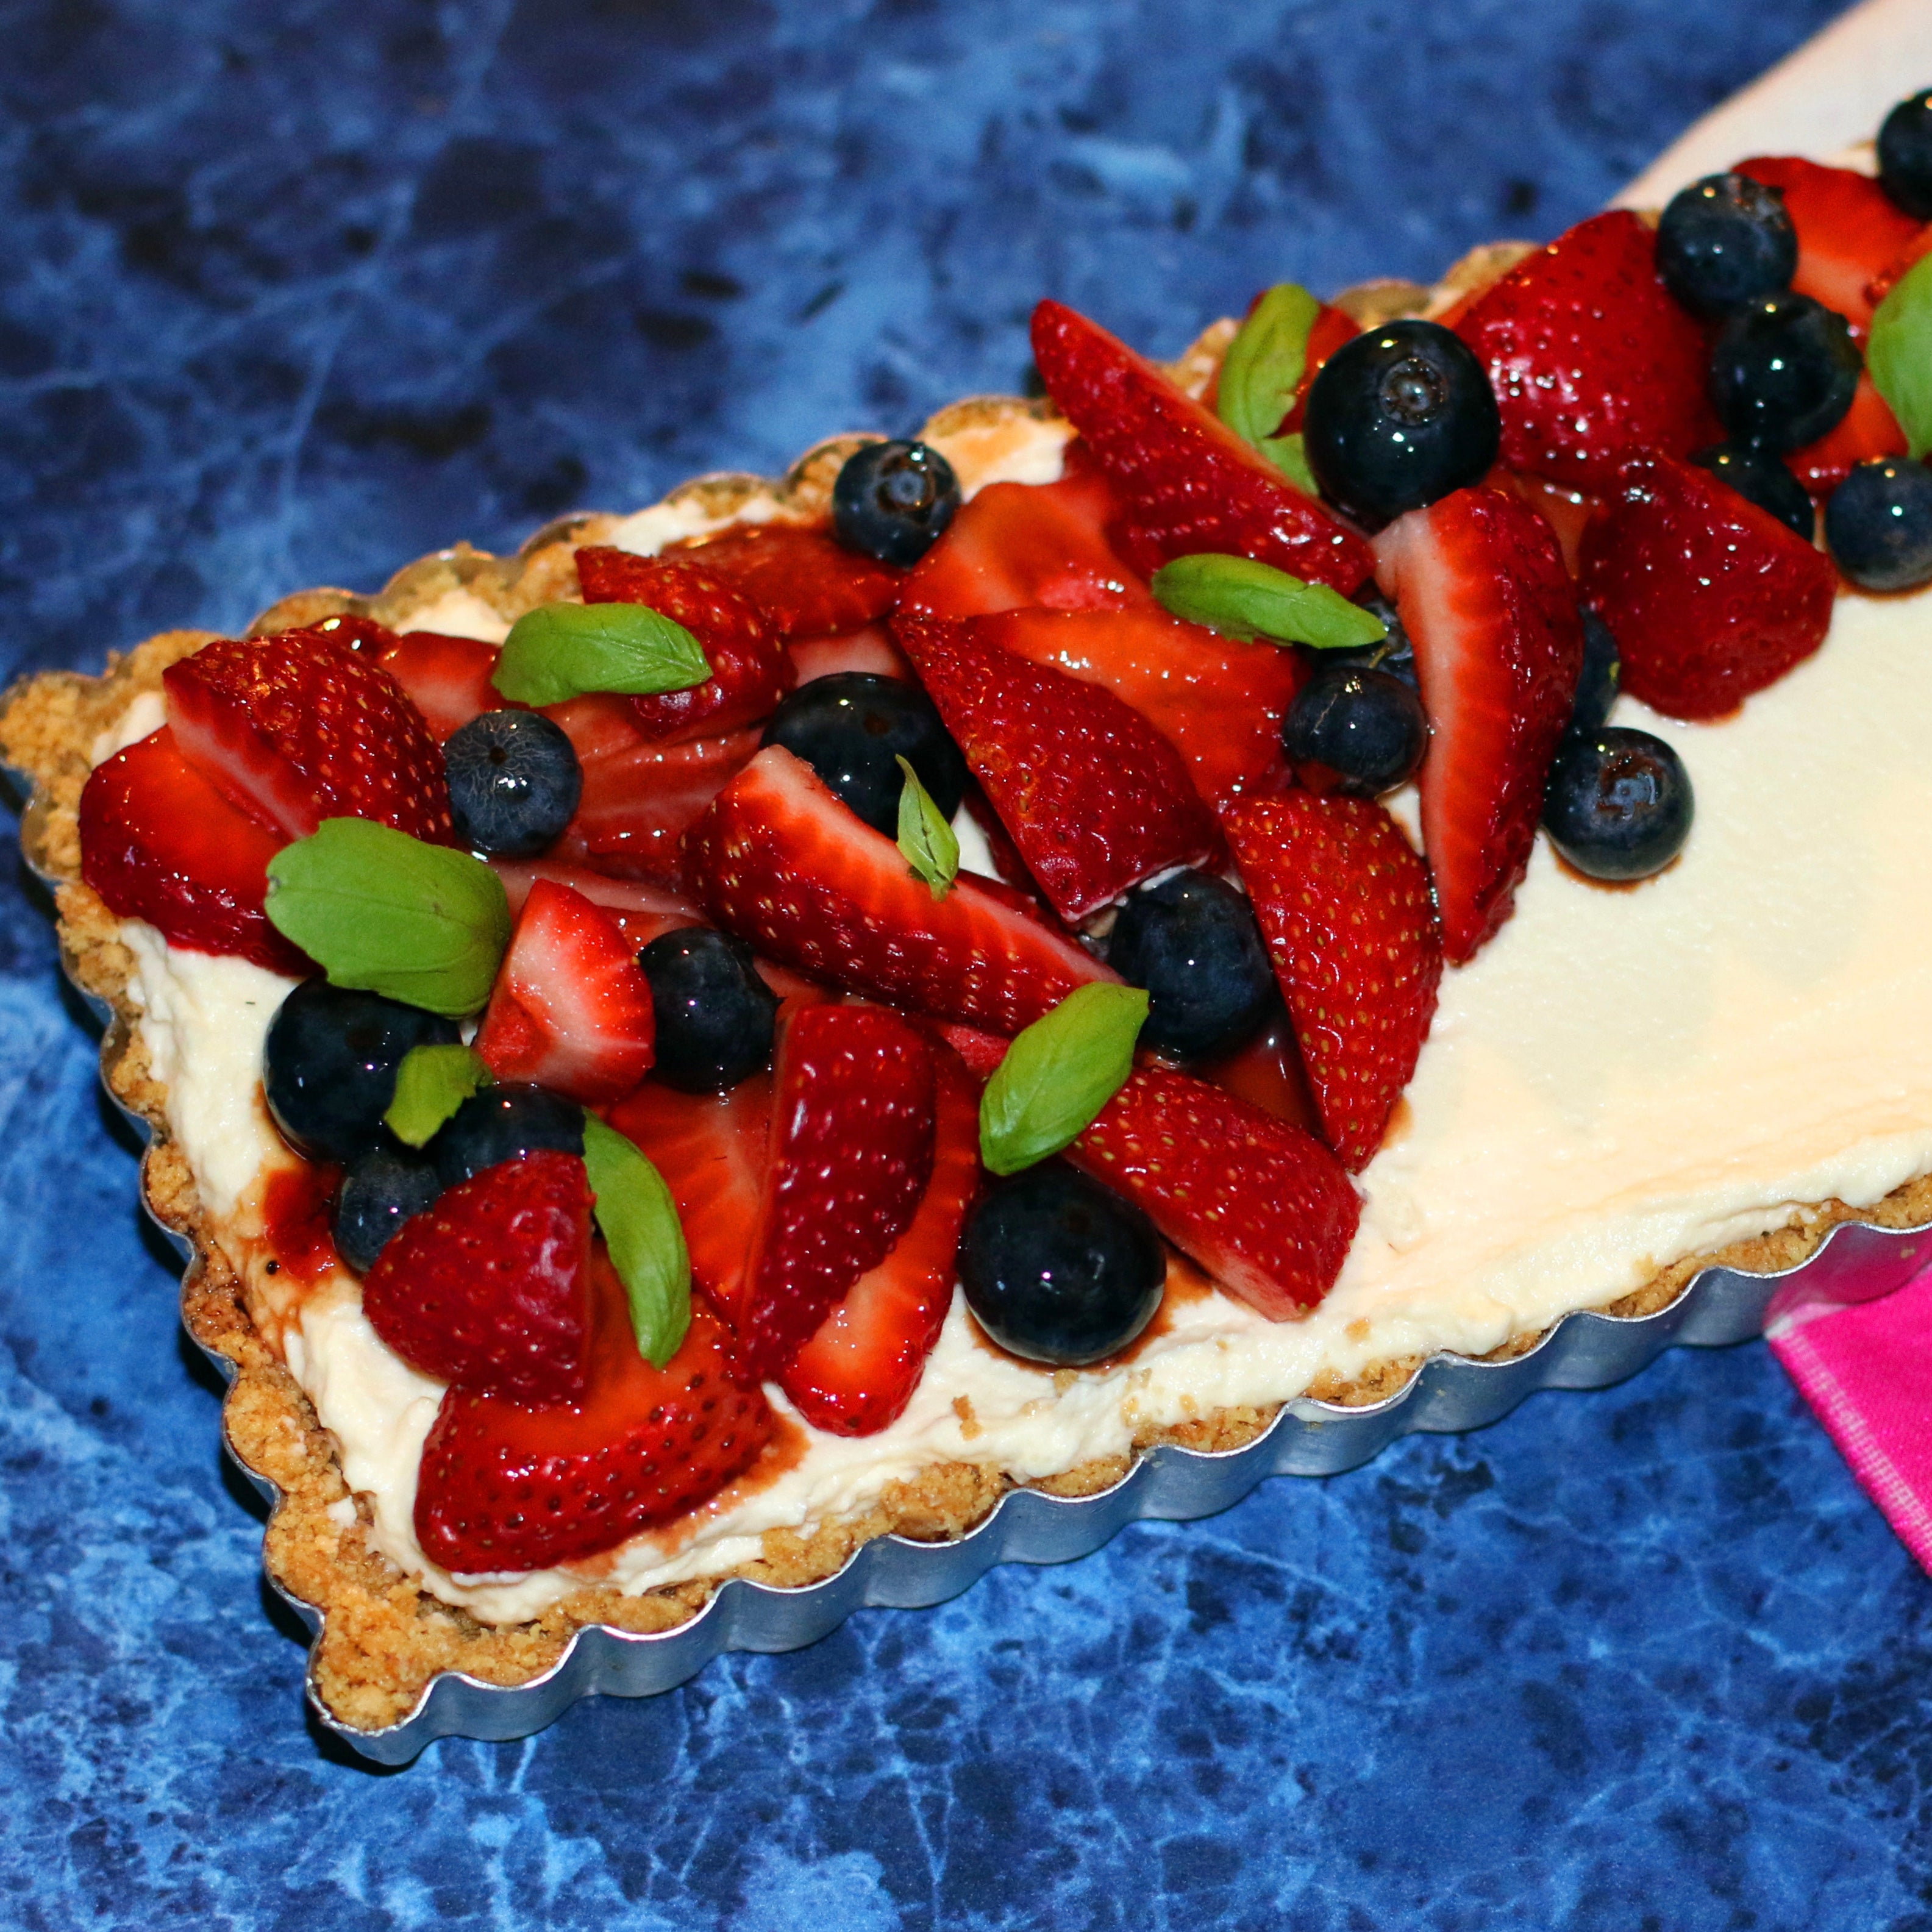 Marscapone Tart with Balsamic Marinated Fruit